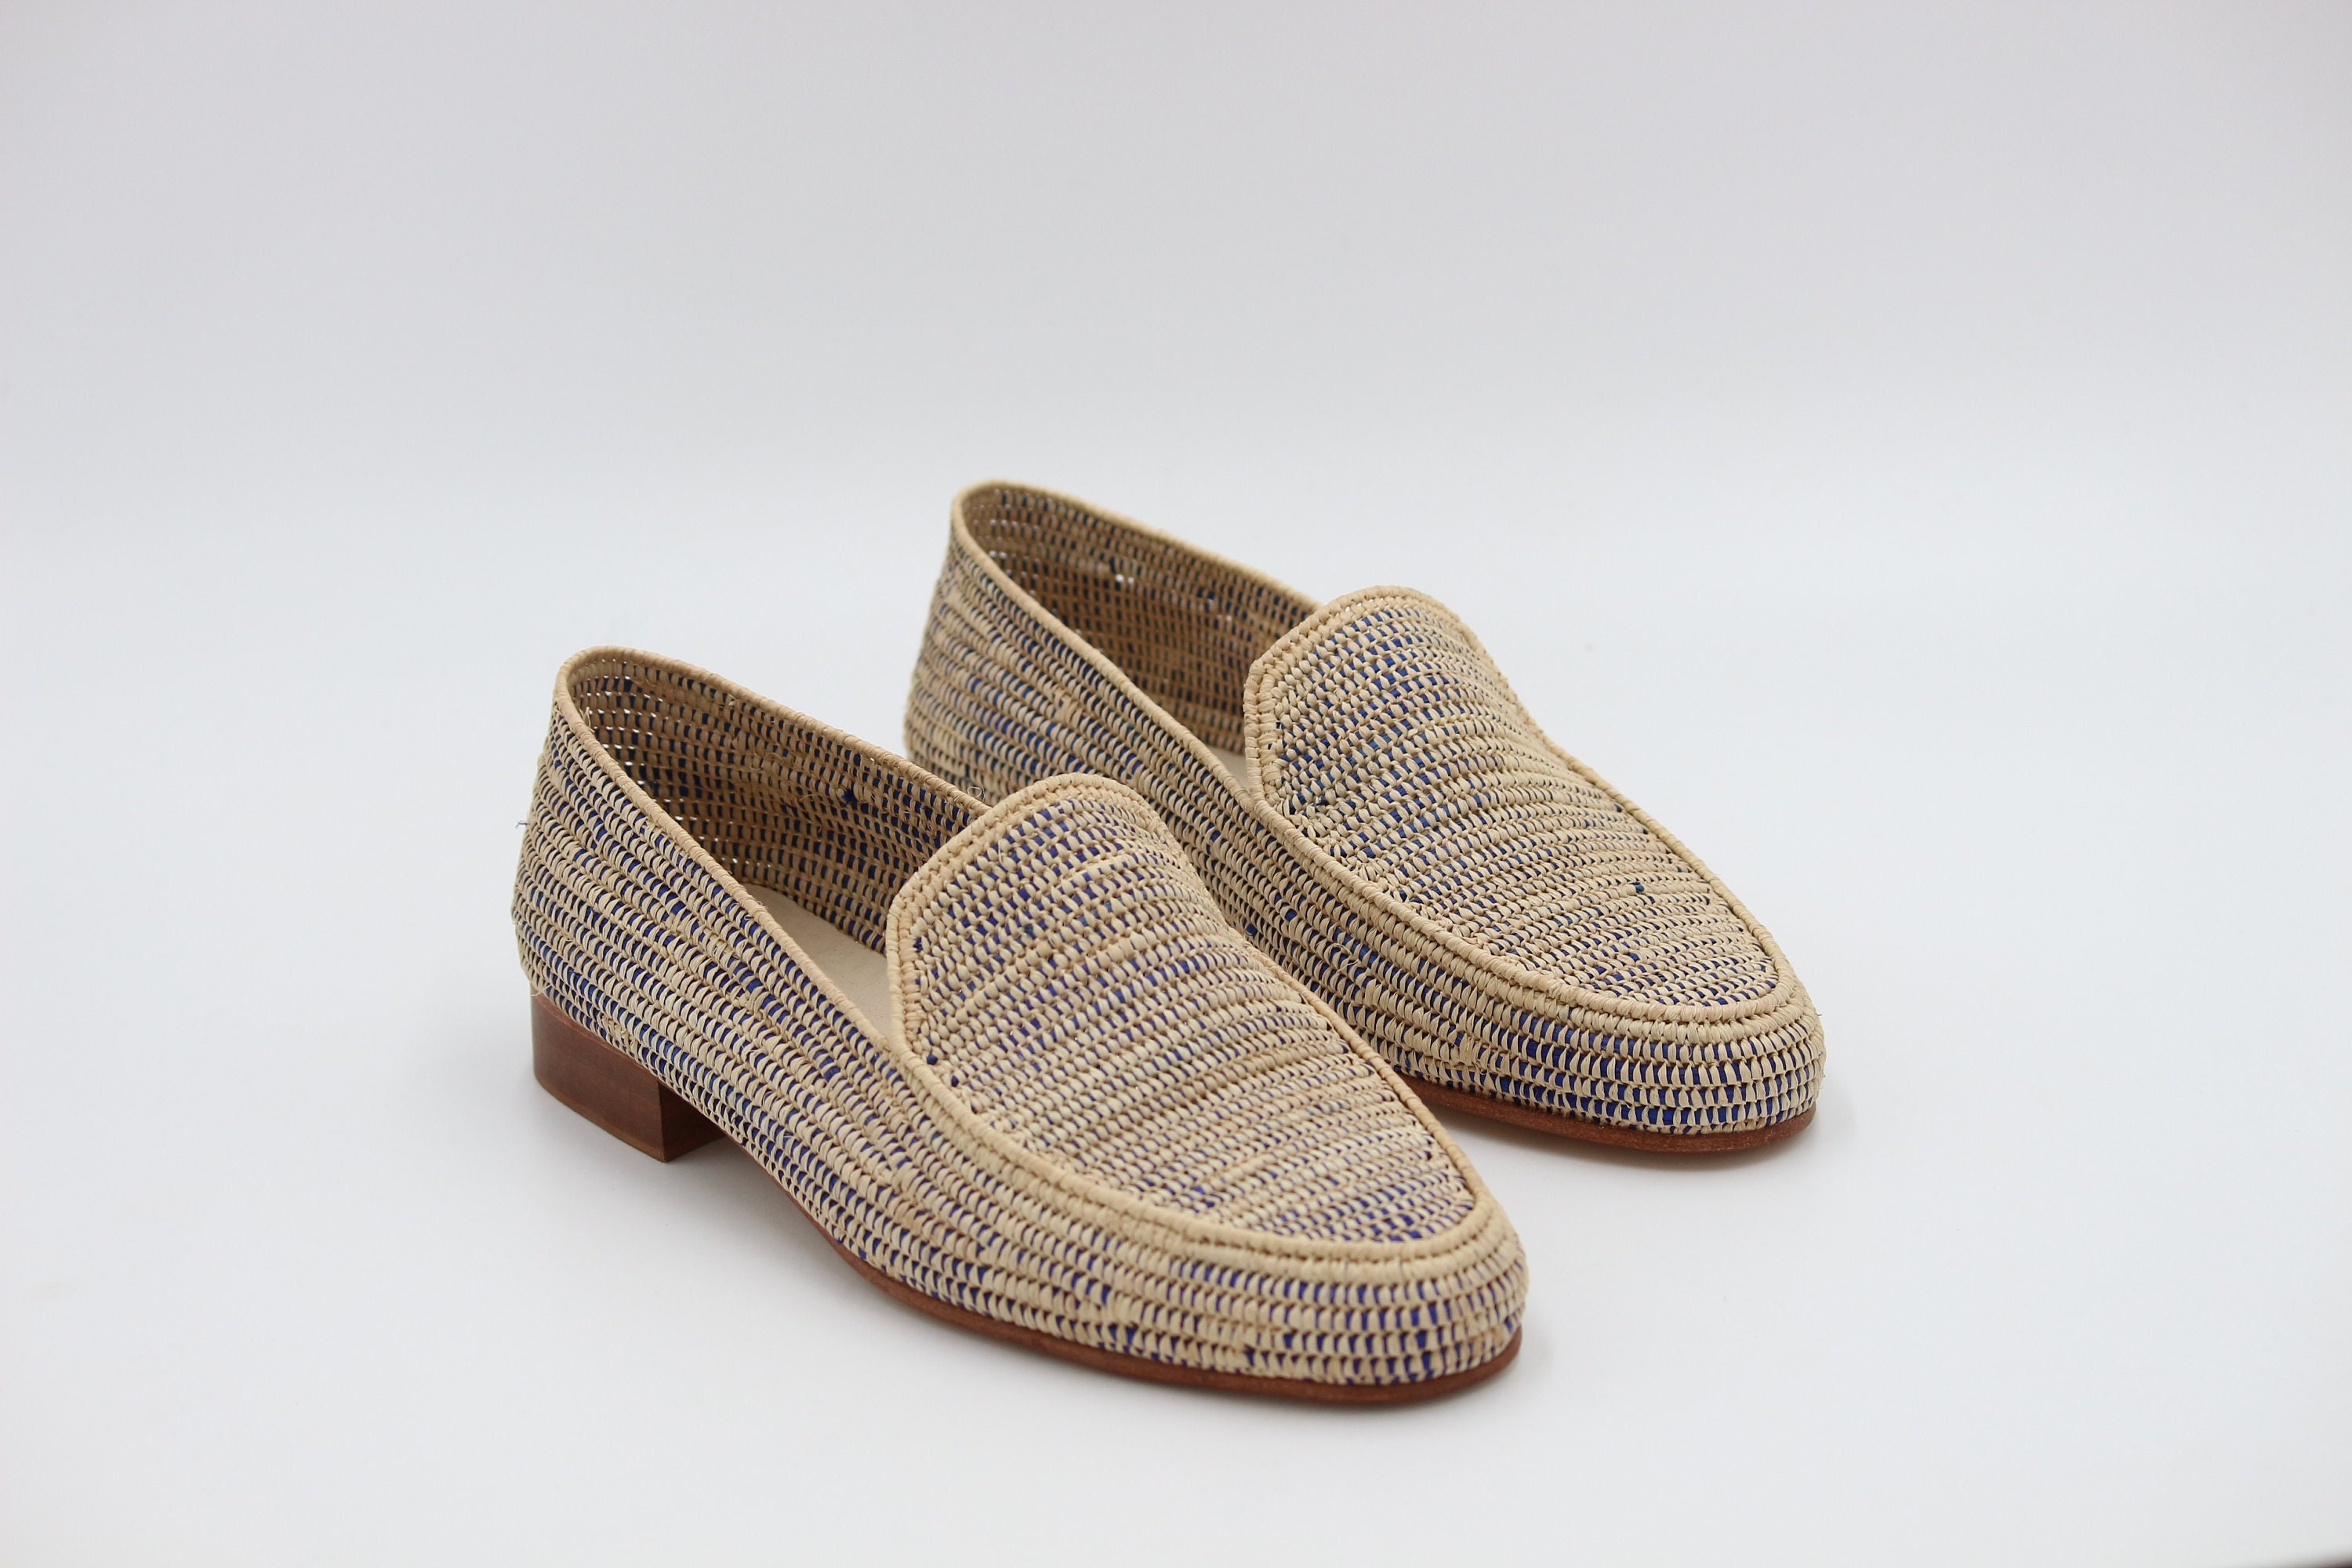 Shoes Mens Shoes Loafers & Slip Ons Raffia mocassin loafer Mocassin Raffia Mules natural raffia moccasins for Men Raffia shoes for men men Raffia shoes 